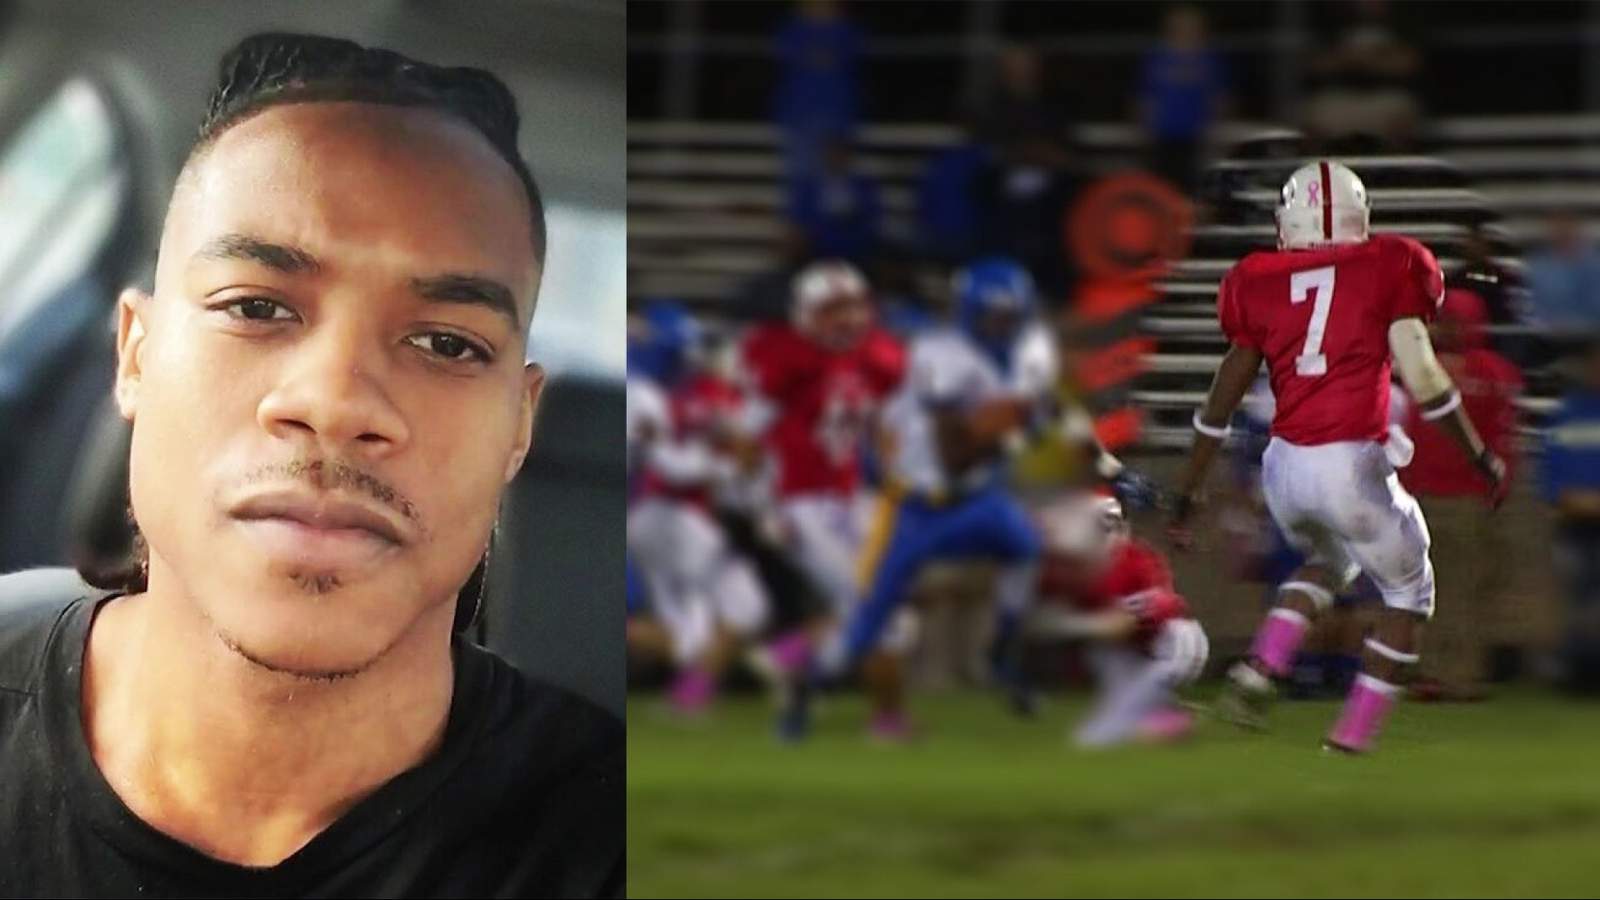 Noah Green, the man who killed a Capitol Police officer Friday, played football at Alleghany High School